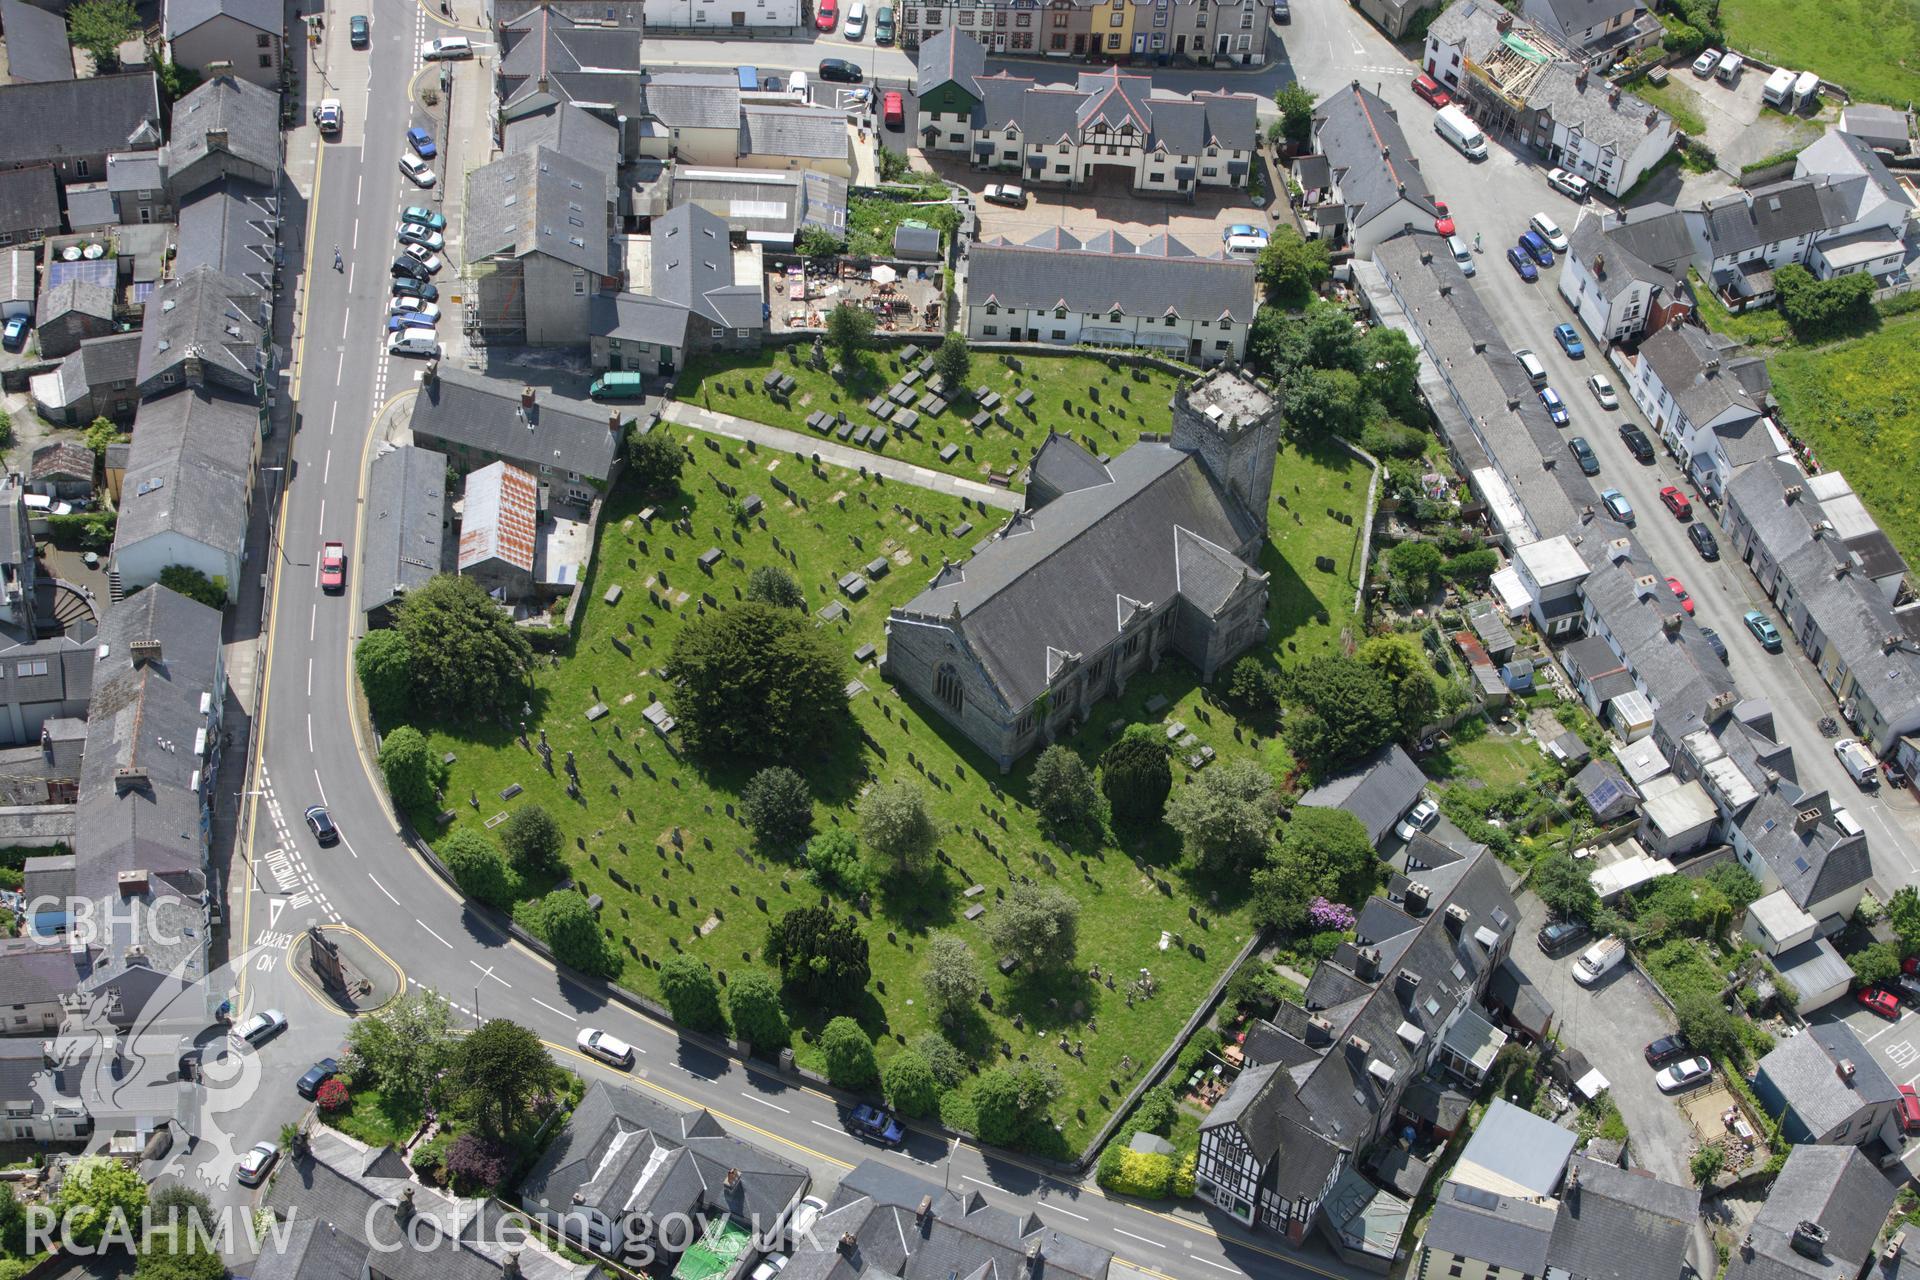 RCAHMW colour oblique aerial photograph of St Peter's Church, Heol Penrallt and Doll Street, Machynlleth. Taken on 02 June 2009 by Toby Driver